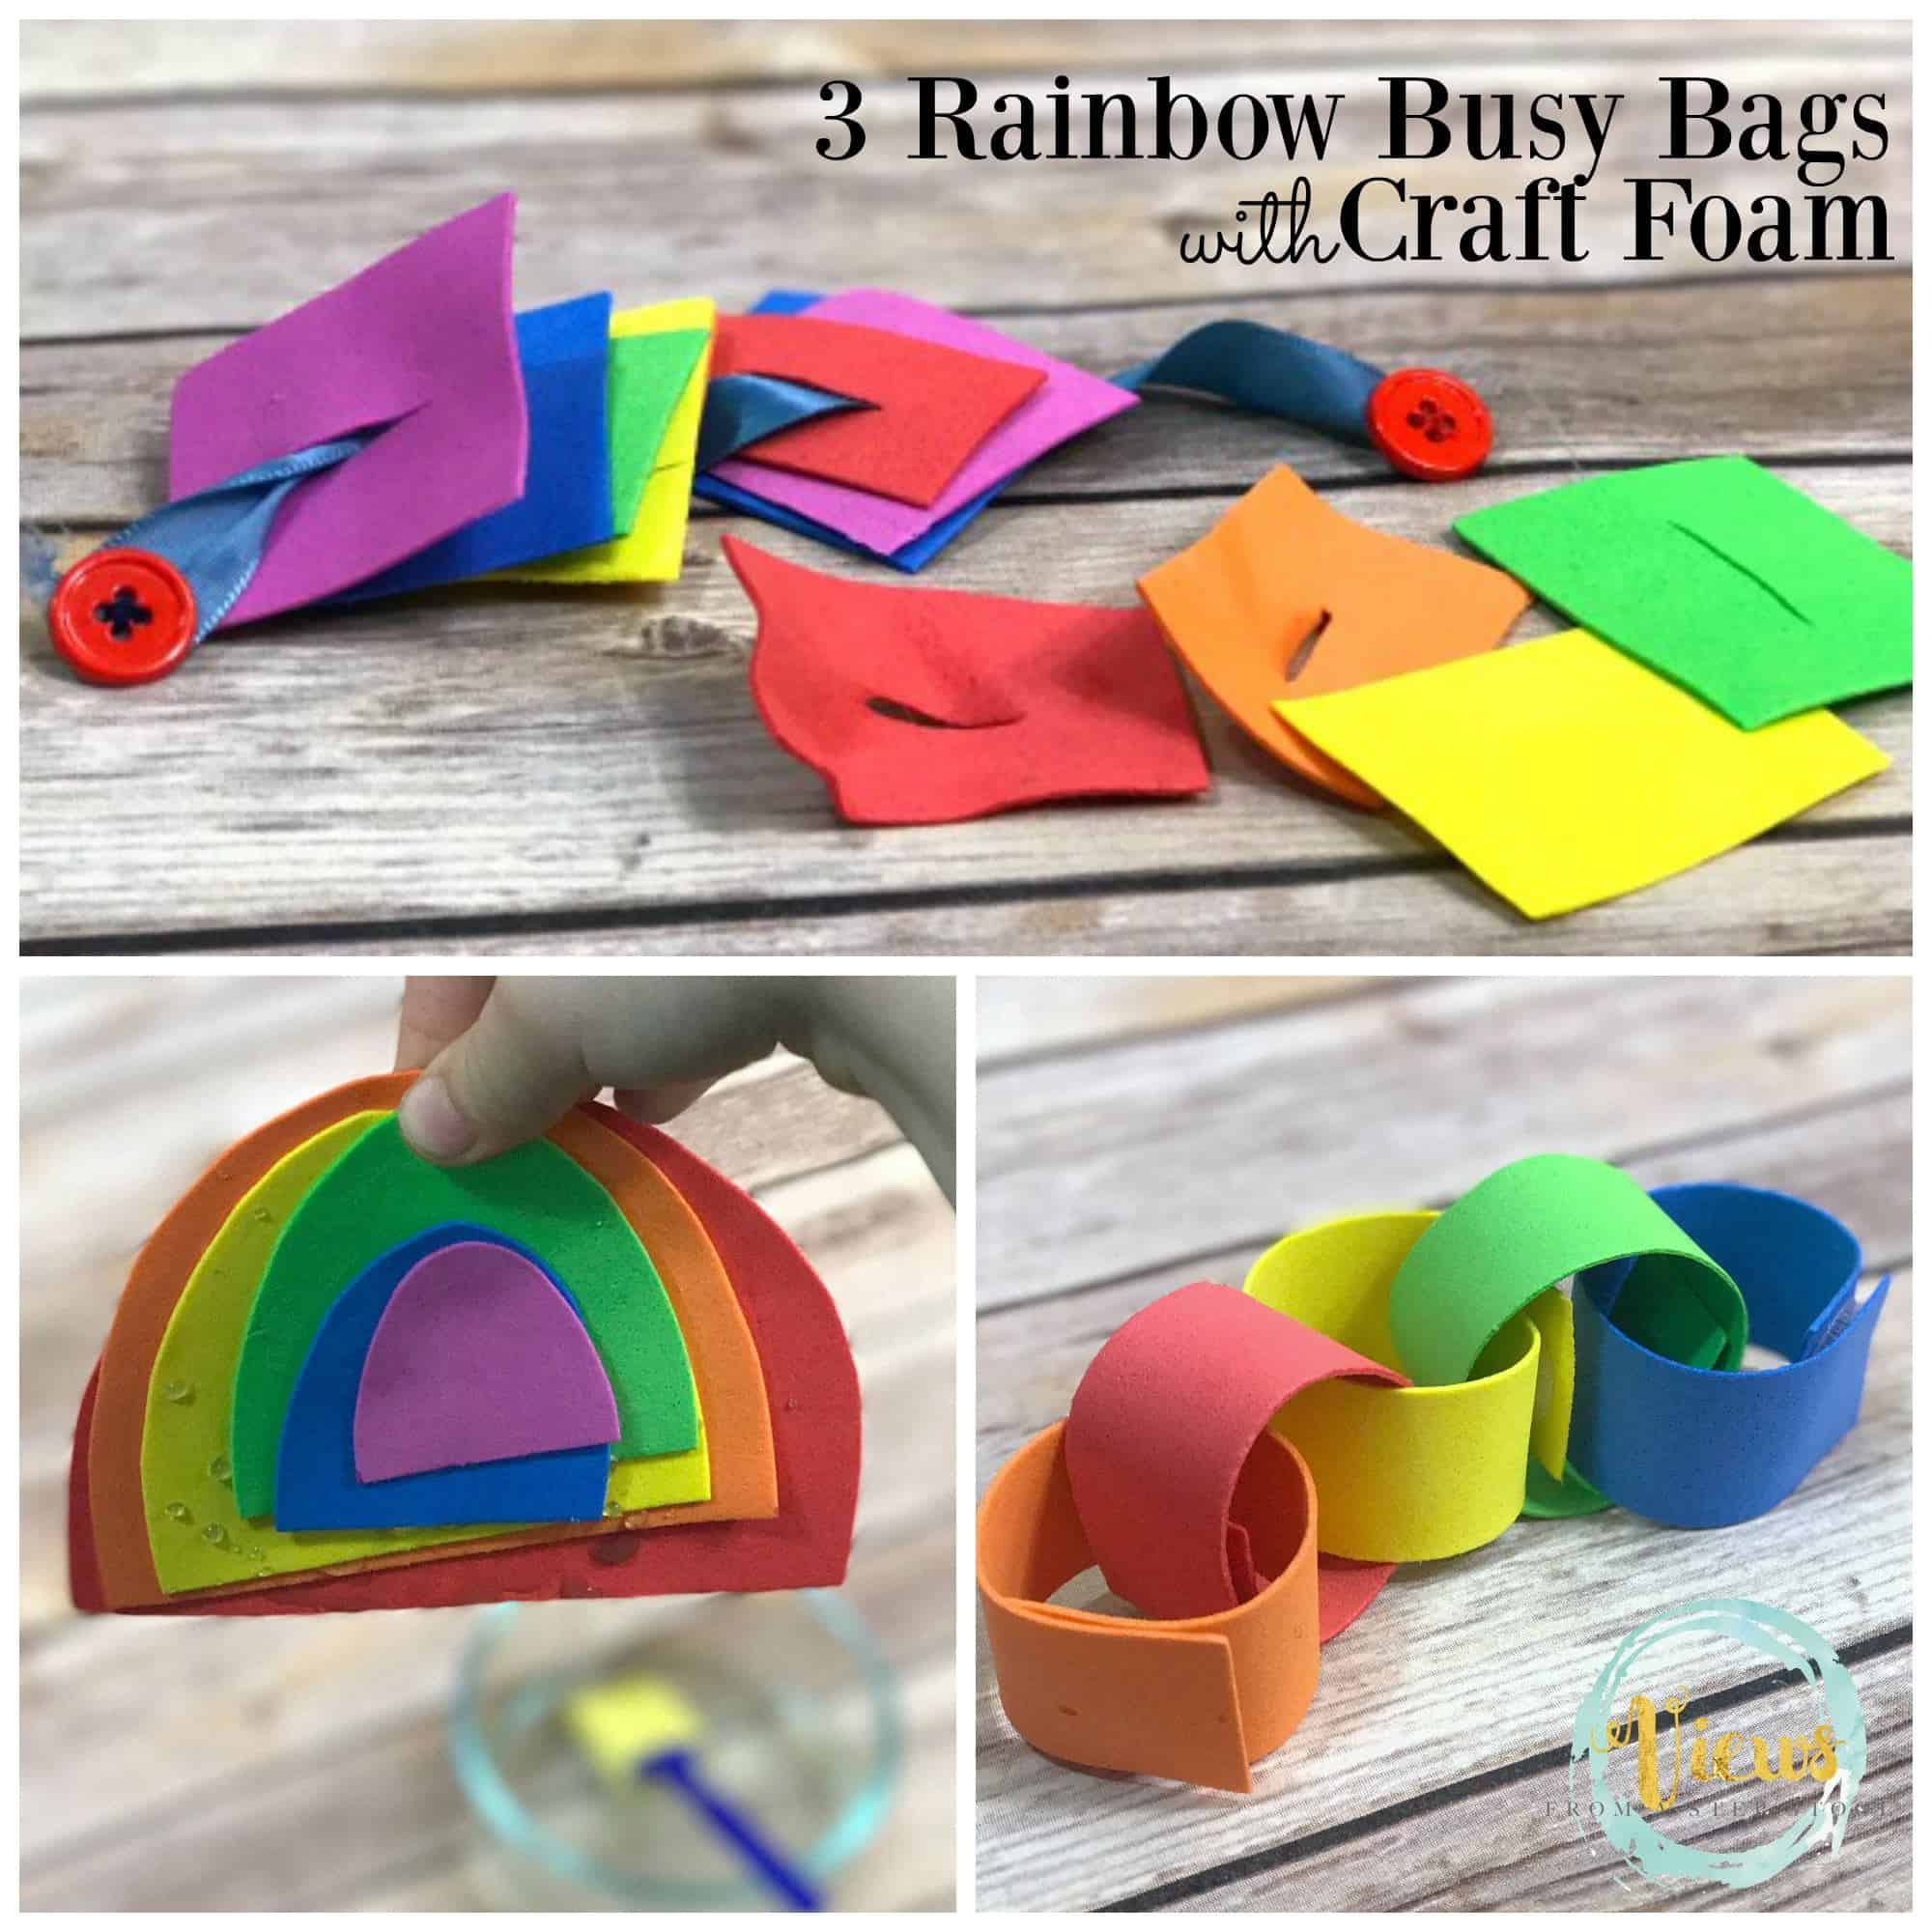 These rainbow busy bags are all made from craft foam bought in bulk at the Dollar Tree! Great for keeping kids entertained and practicing fine motor skills!